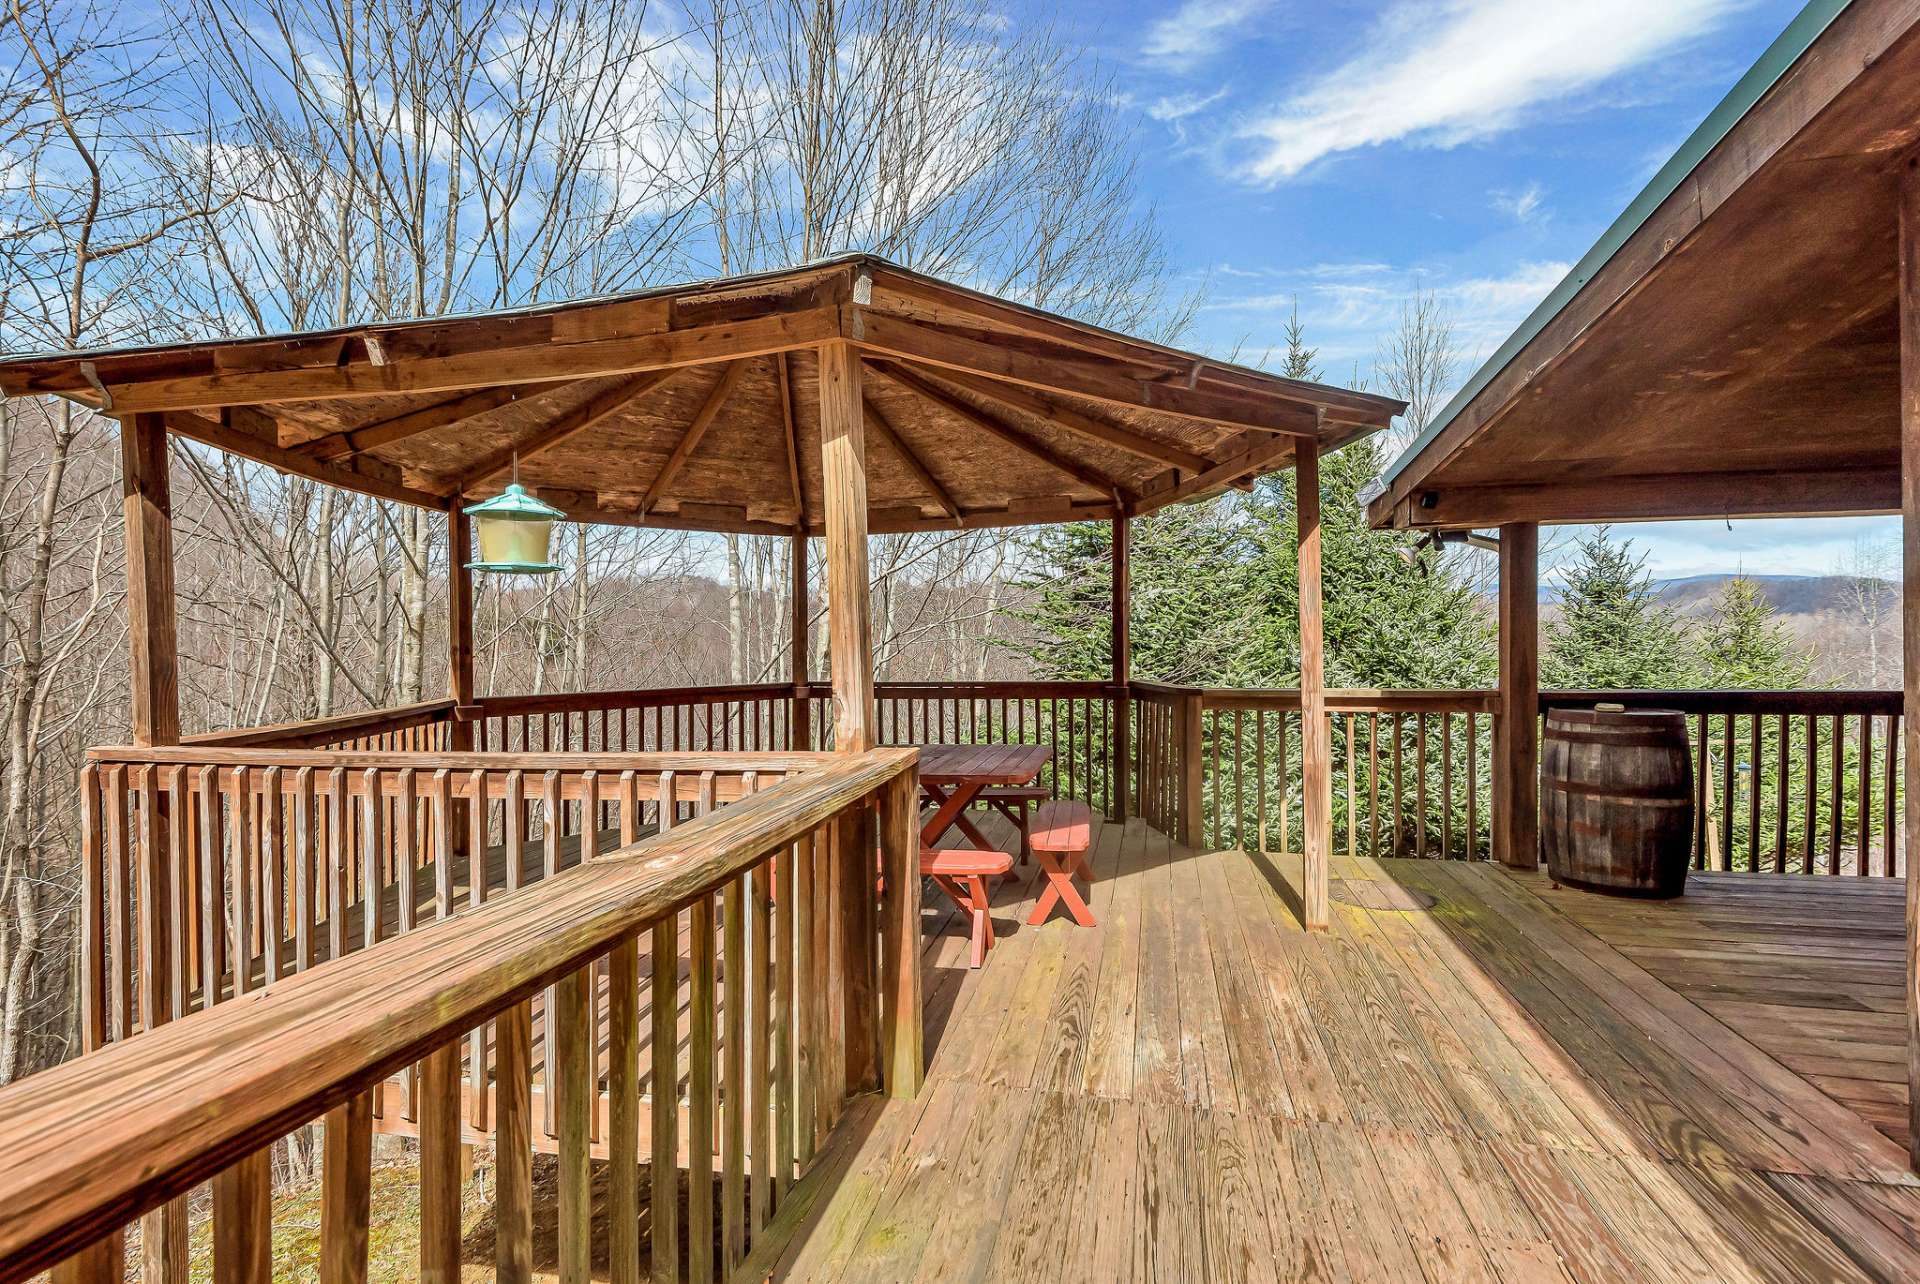 The front gazebo offers a great space to enjoy alfresco dining.